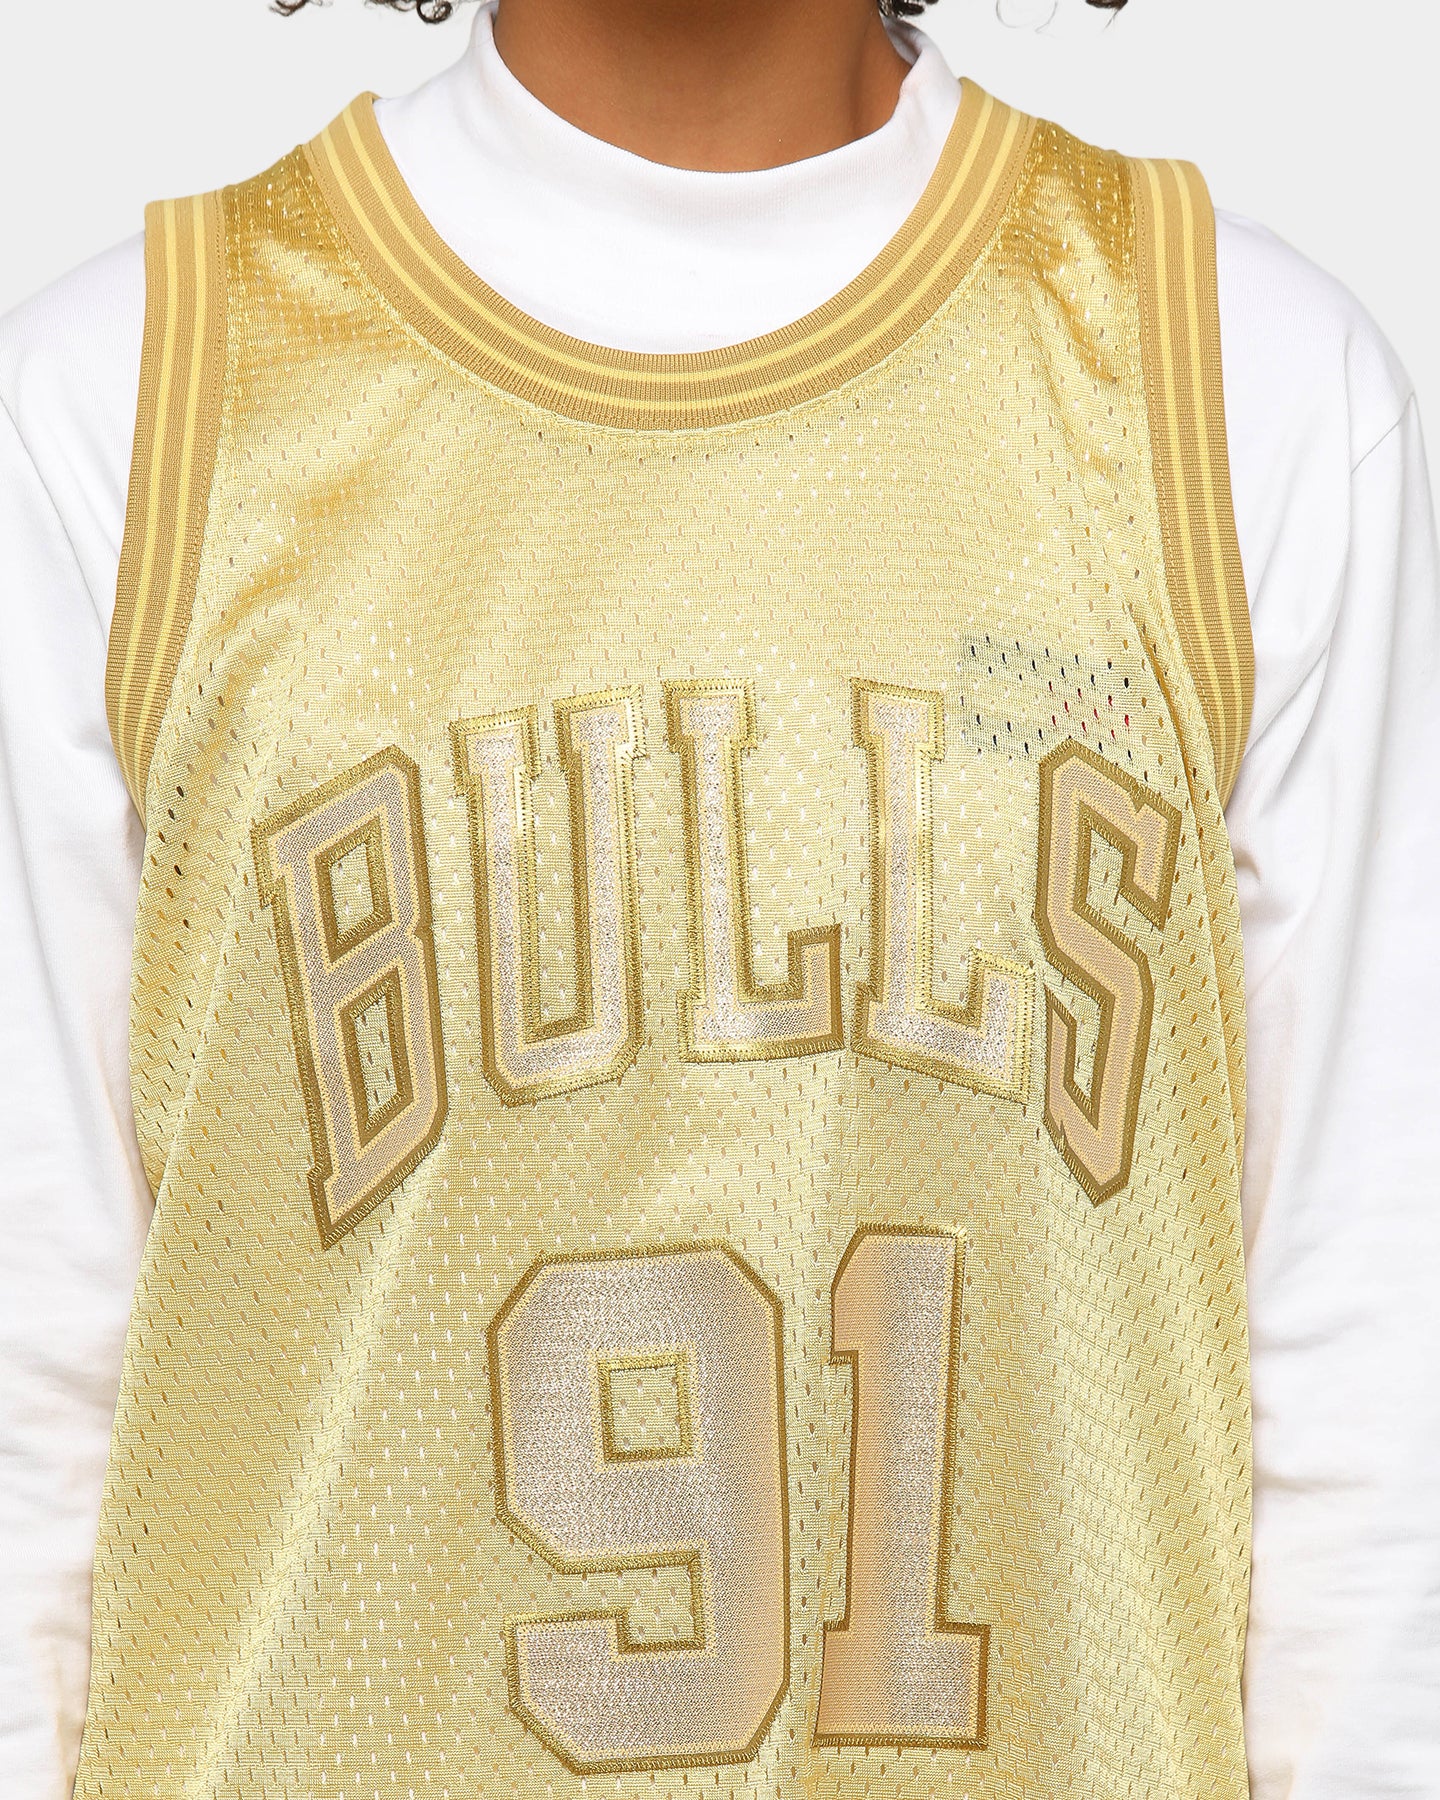 mitchell and ness gold jersey